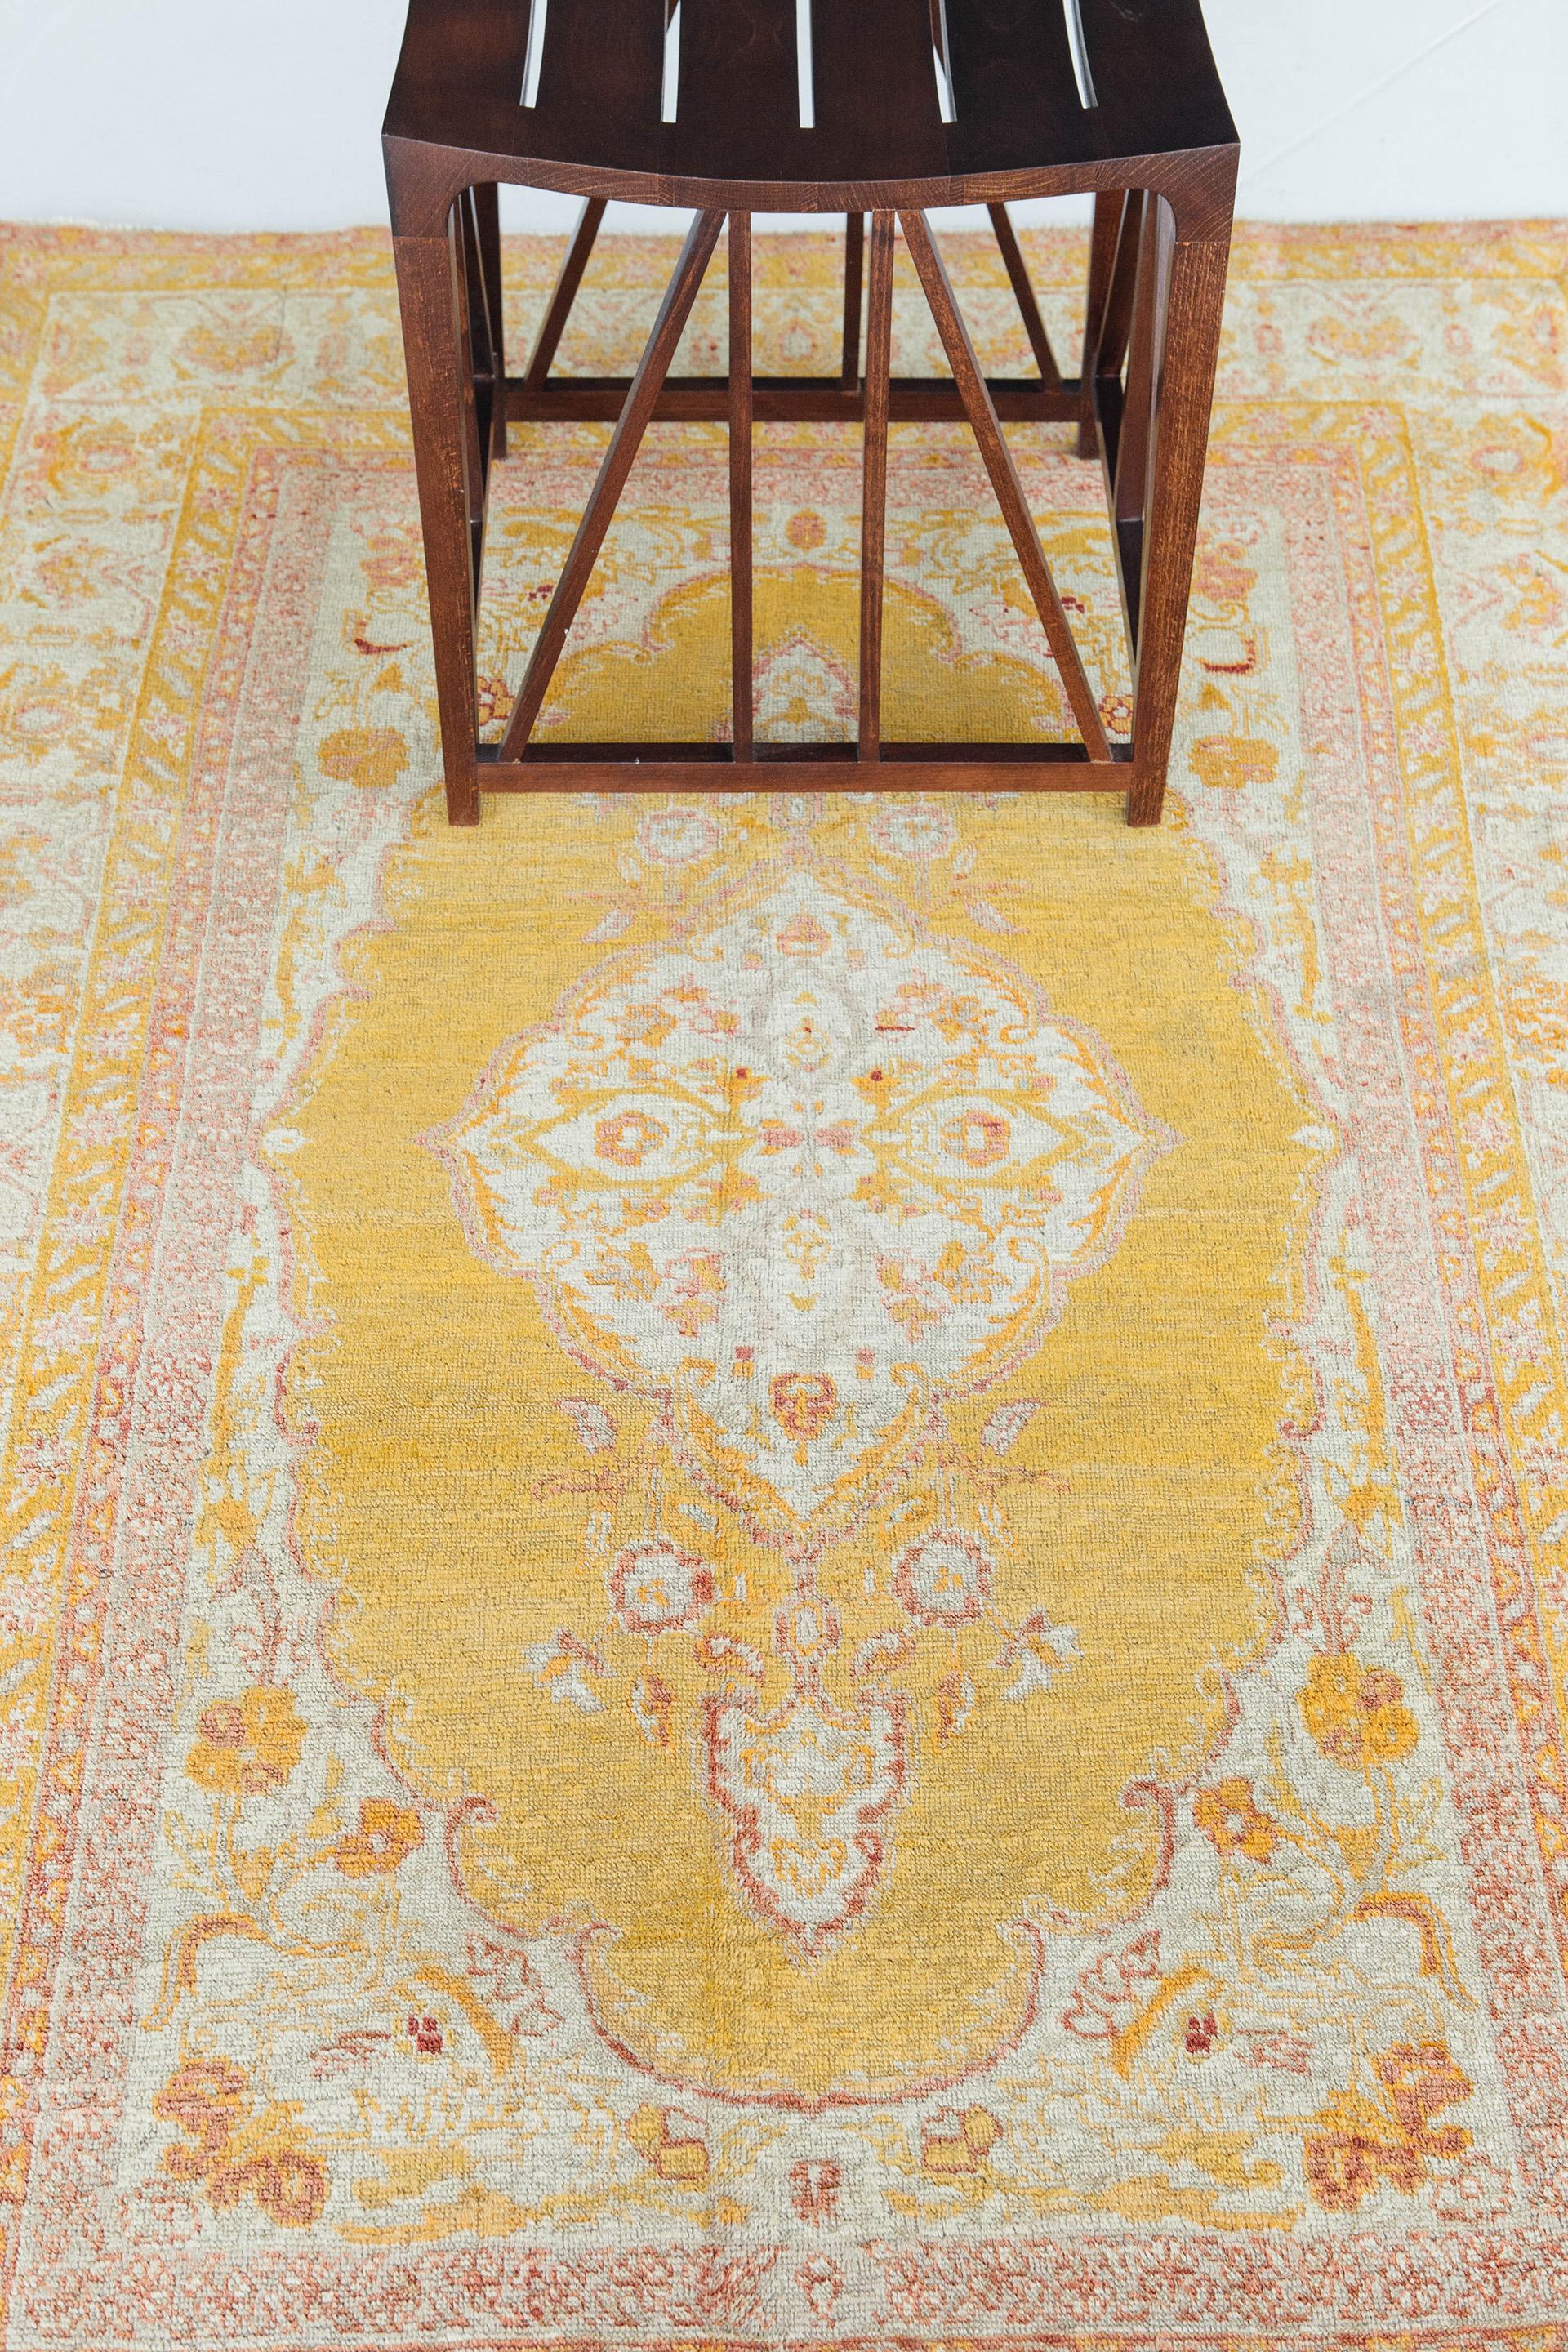 An impressive centerpiece for any room that captivates you in brilliant yellow and red hues. With its grandiose motifs at the core and surrounded by motifs, it brings your whole vision of light and peace. Having this one-of-a-kind Turkish rug will